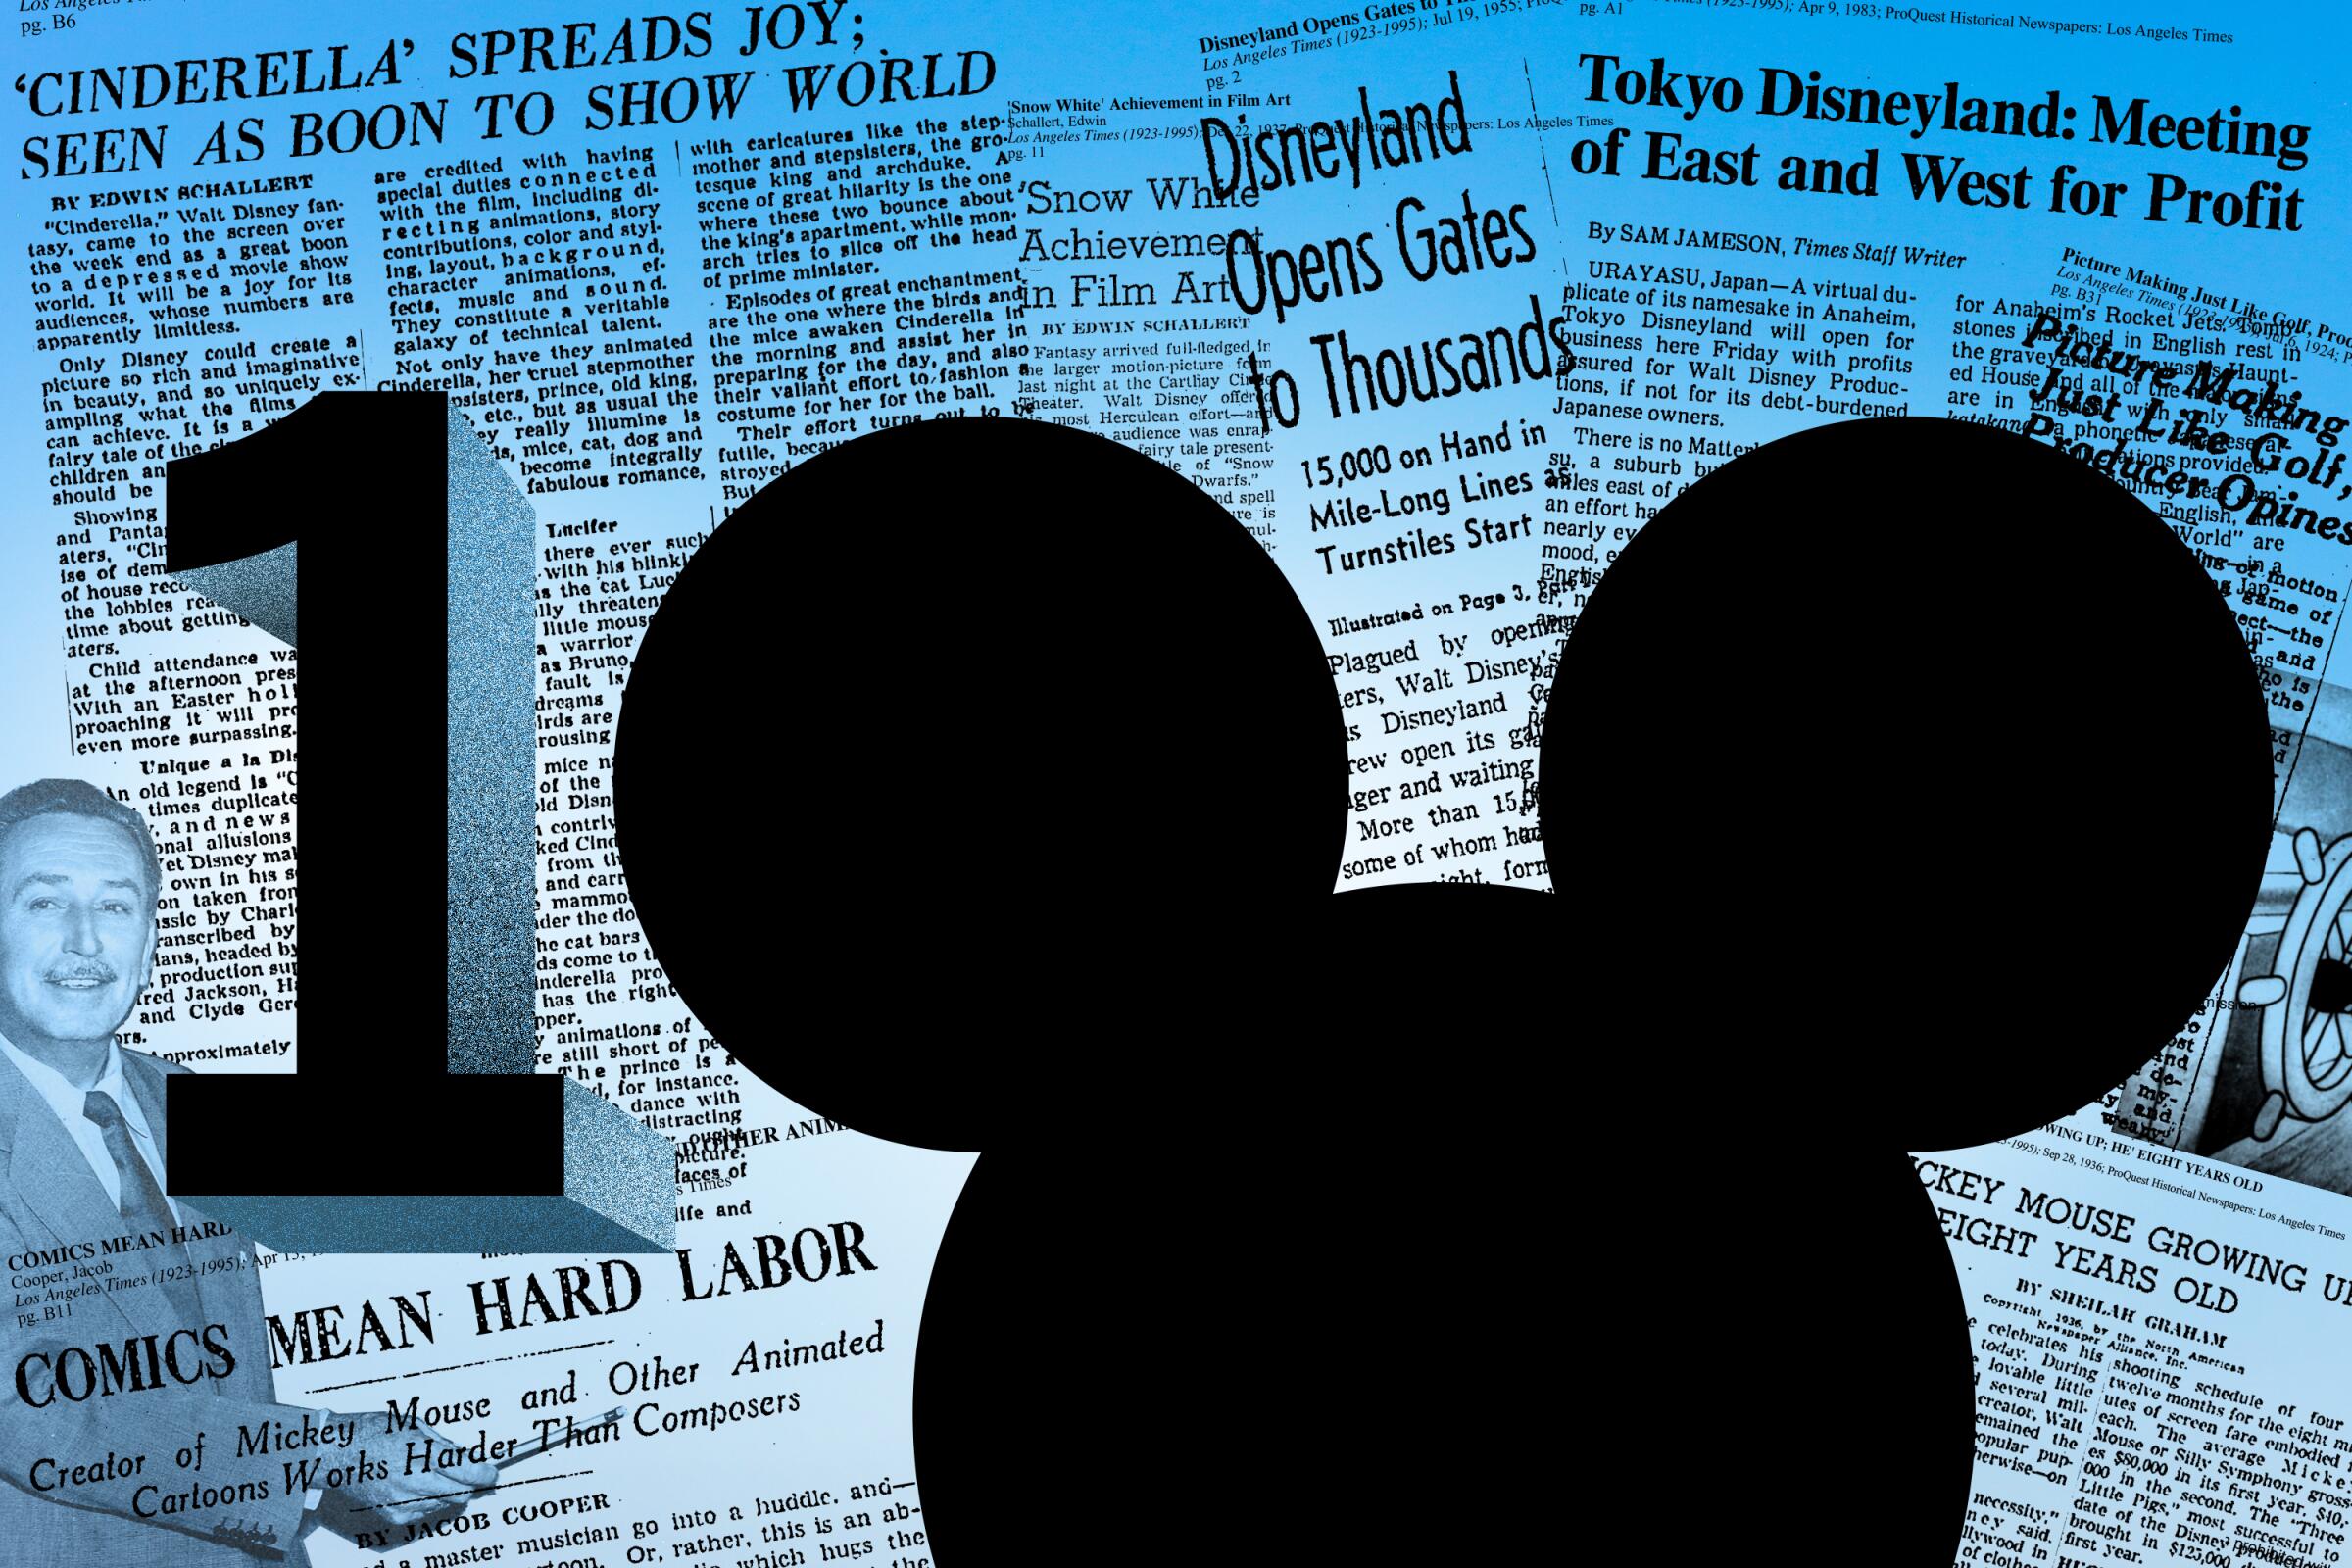 Seven ways Disney changed the entertainment business - Los Angeles Times